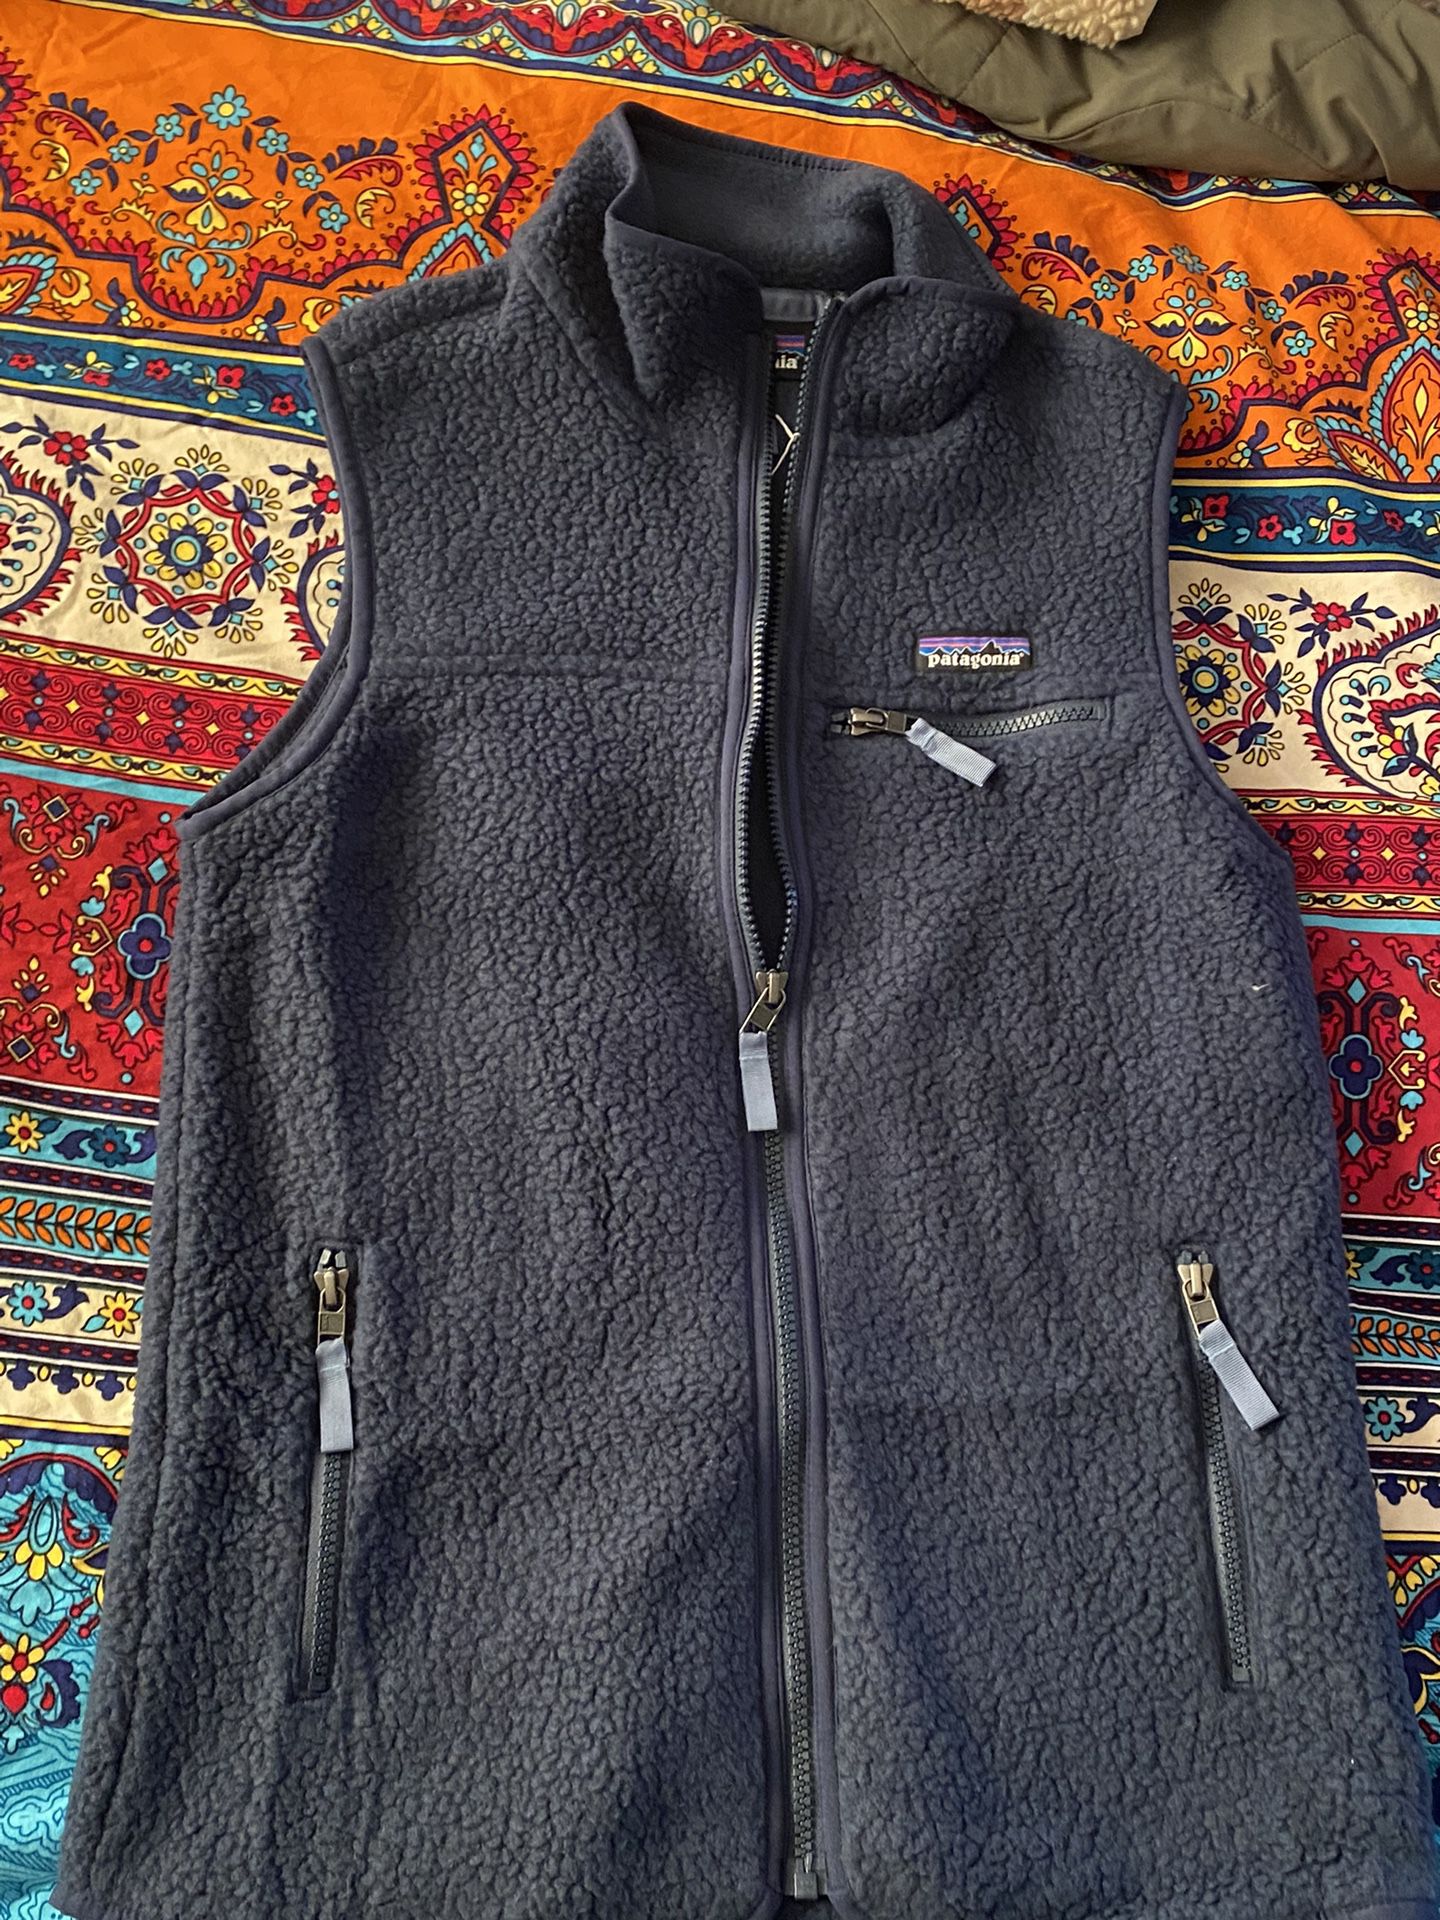 Patagonia Woman’s Vest- New